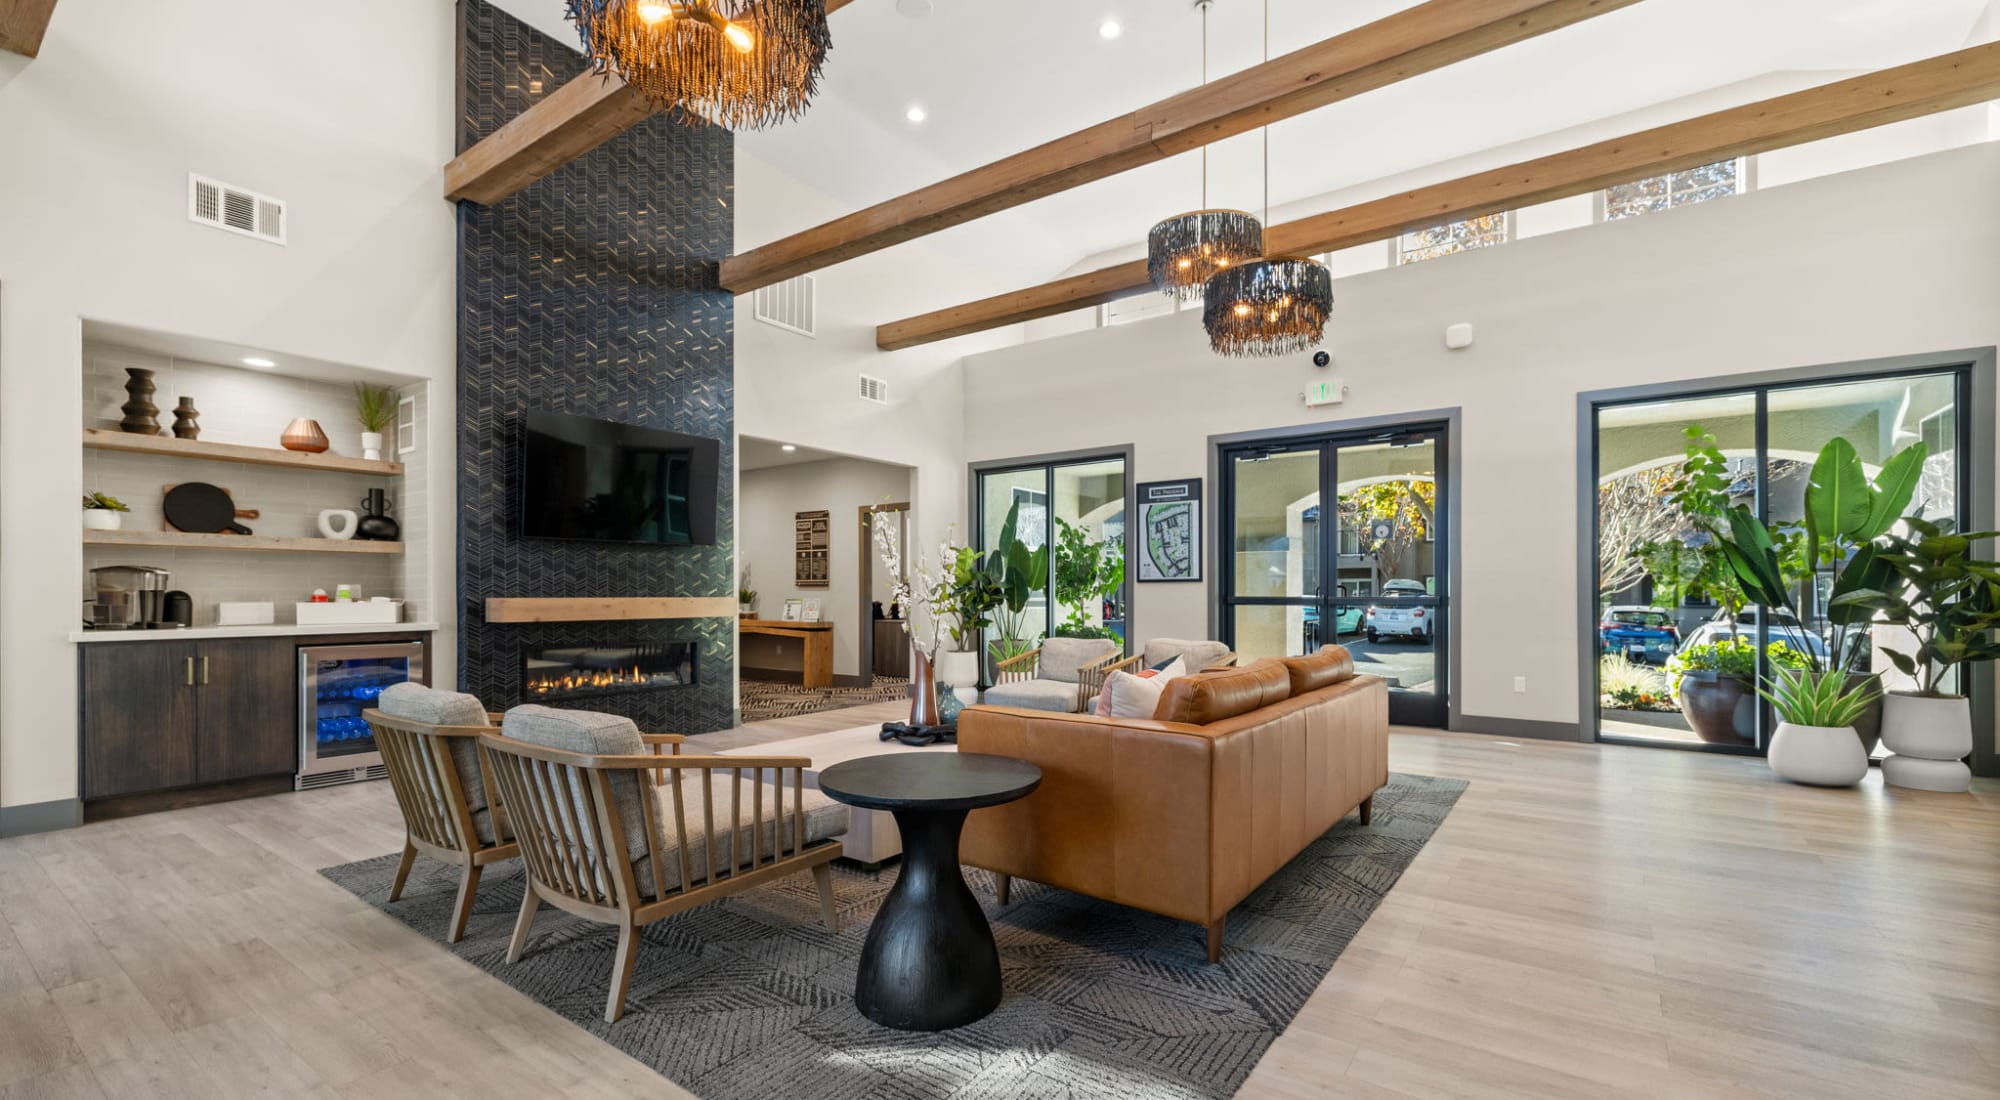 Gallery | The Preserve at Creekside in Roseville, California